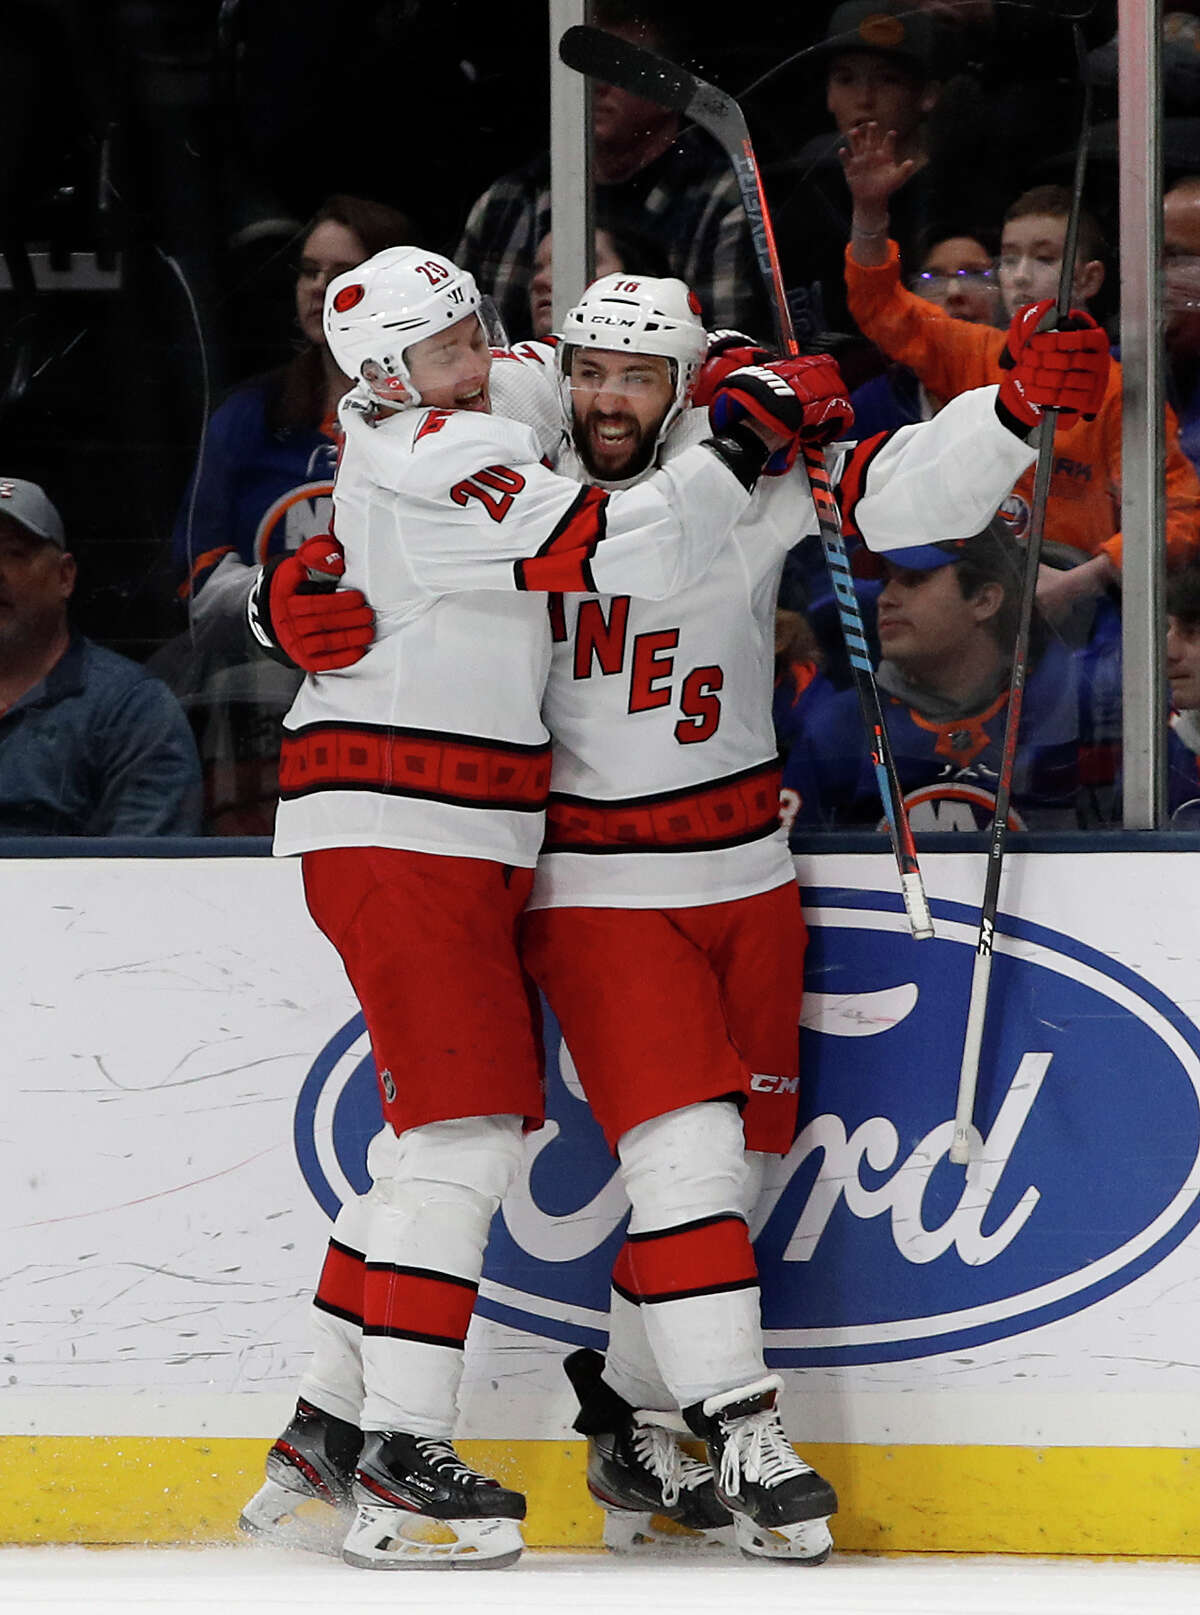 Carolina Hurricanes center Vincent Trocheck (16) celebrates with teammate Sebastian Aho after scoring the game winning goal in overtime during an NHL hockey game against the New York Islanders, Saturday, March 7, 2020, in Uniondale, NY. (AP Photo/Jim McIsaac)